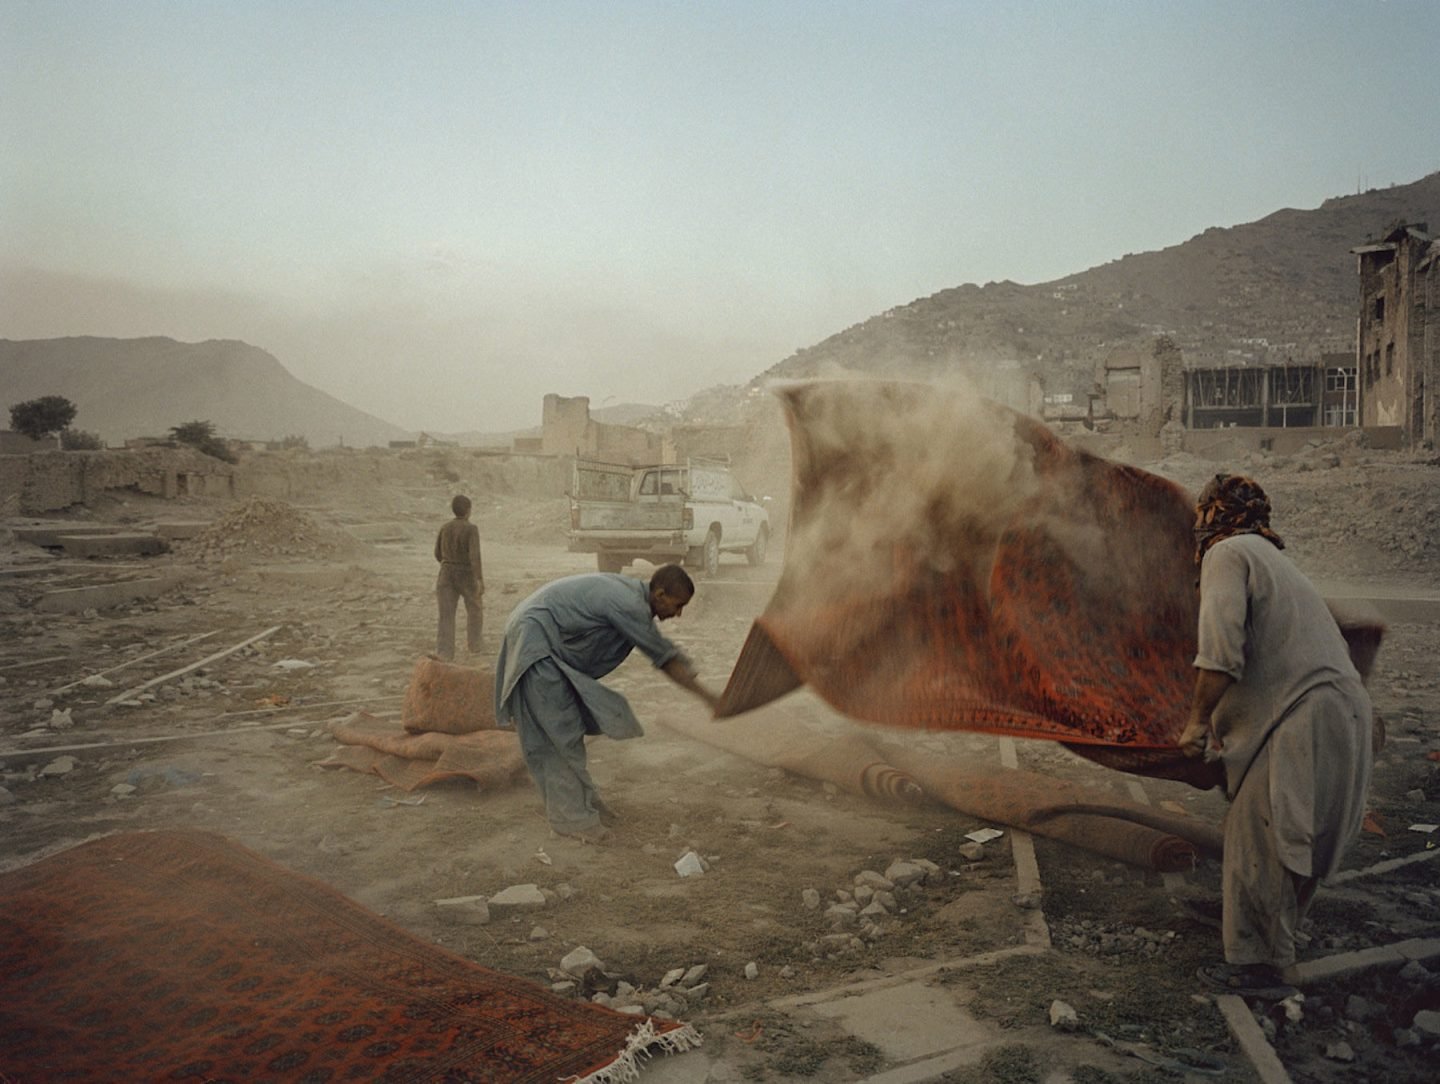 AFGHANISTAN. Kabul. 2004. Men shake dust from rugs that were used for a wedding party.